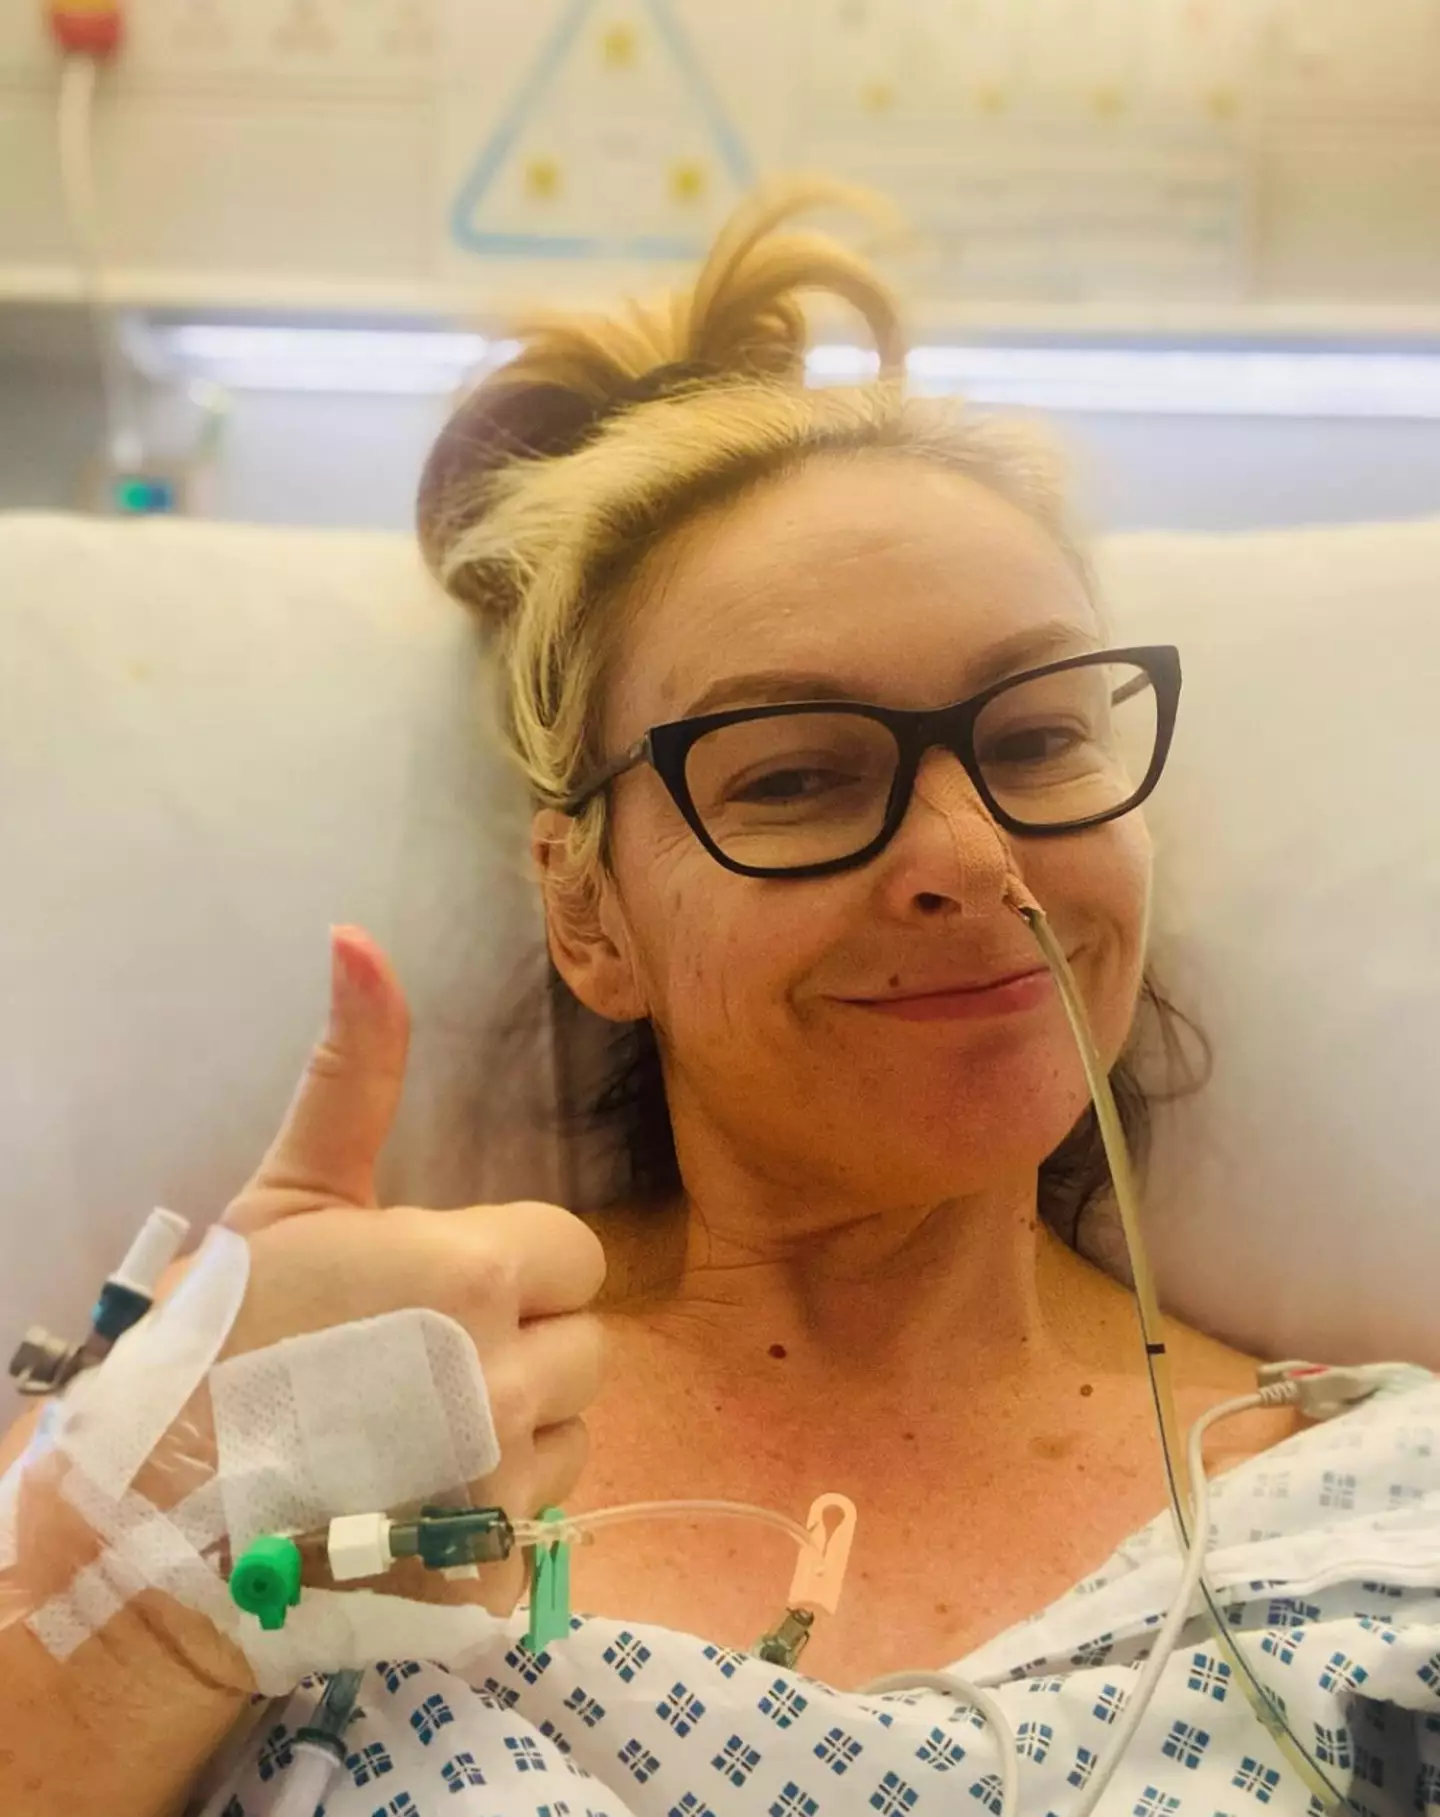 Married at First Sight star Mel Schilling has shared a health update.